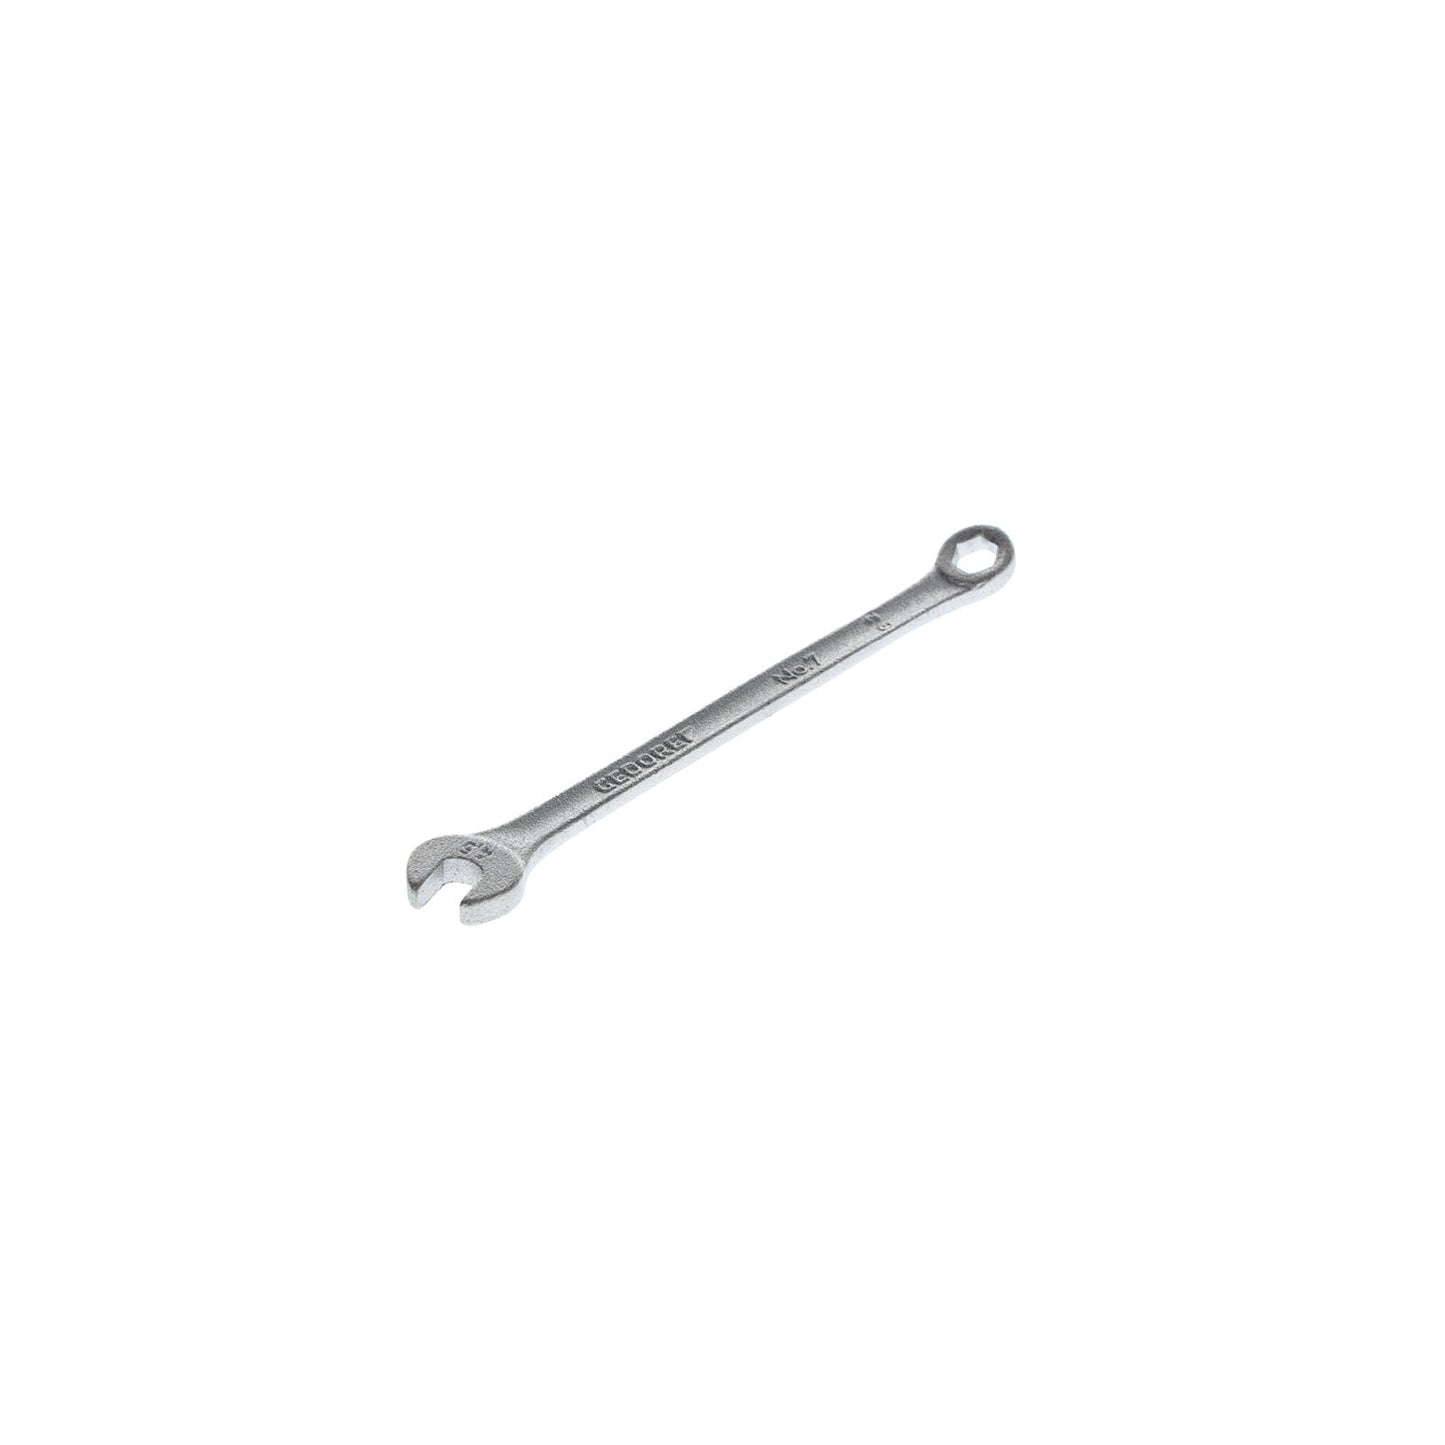 GEDORE 7 4.5 - Combination Wrench, 4.5 mm (6081060)